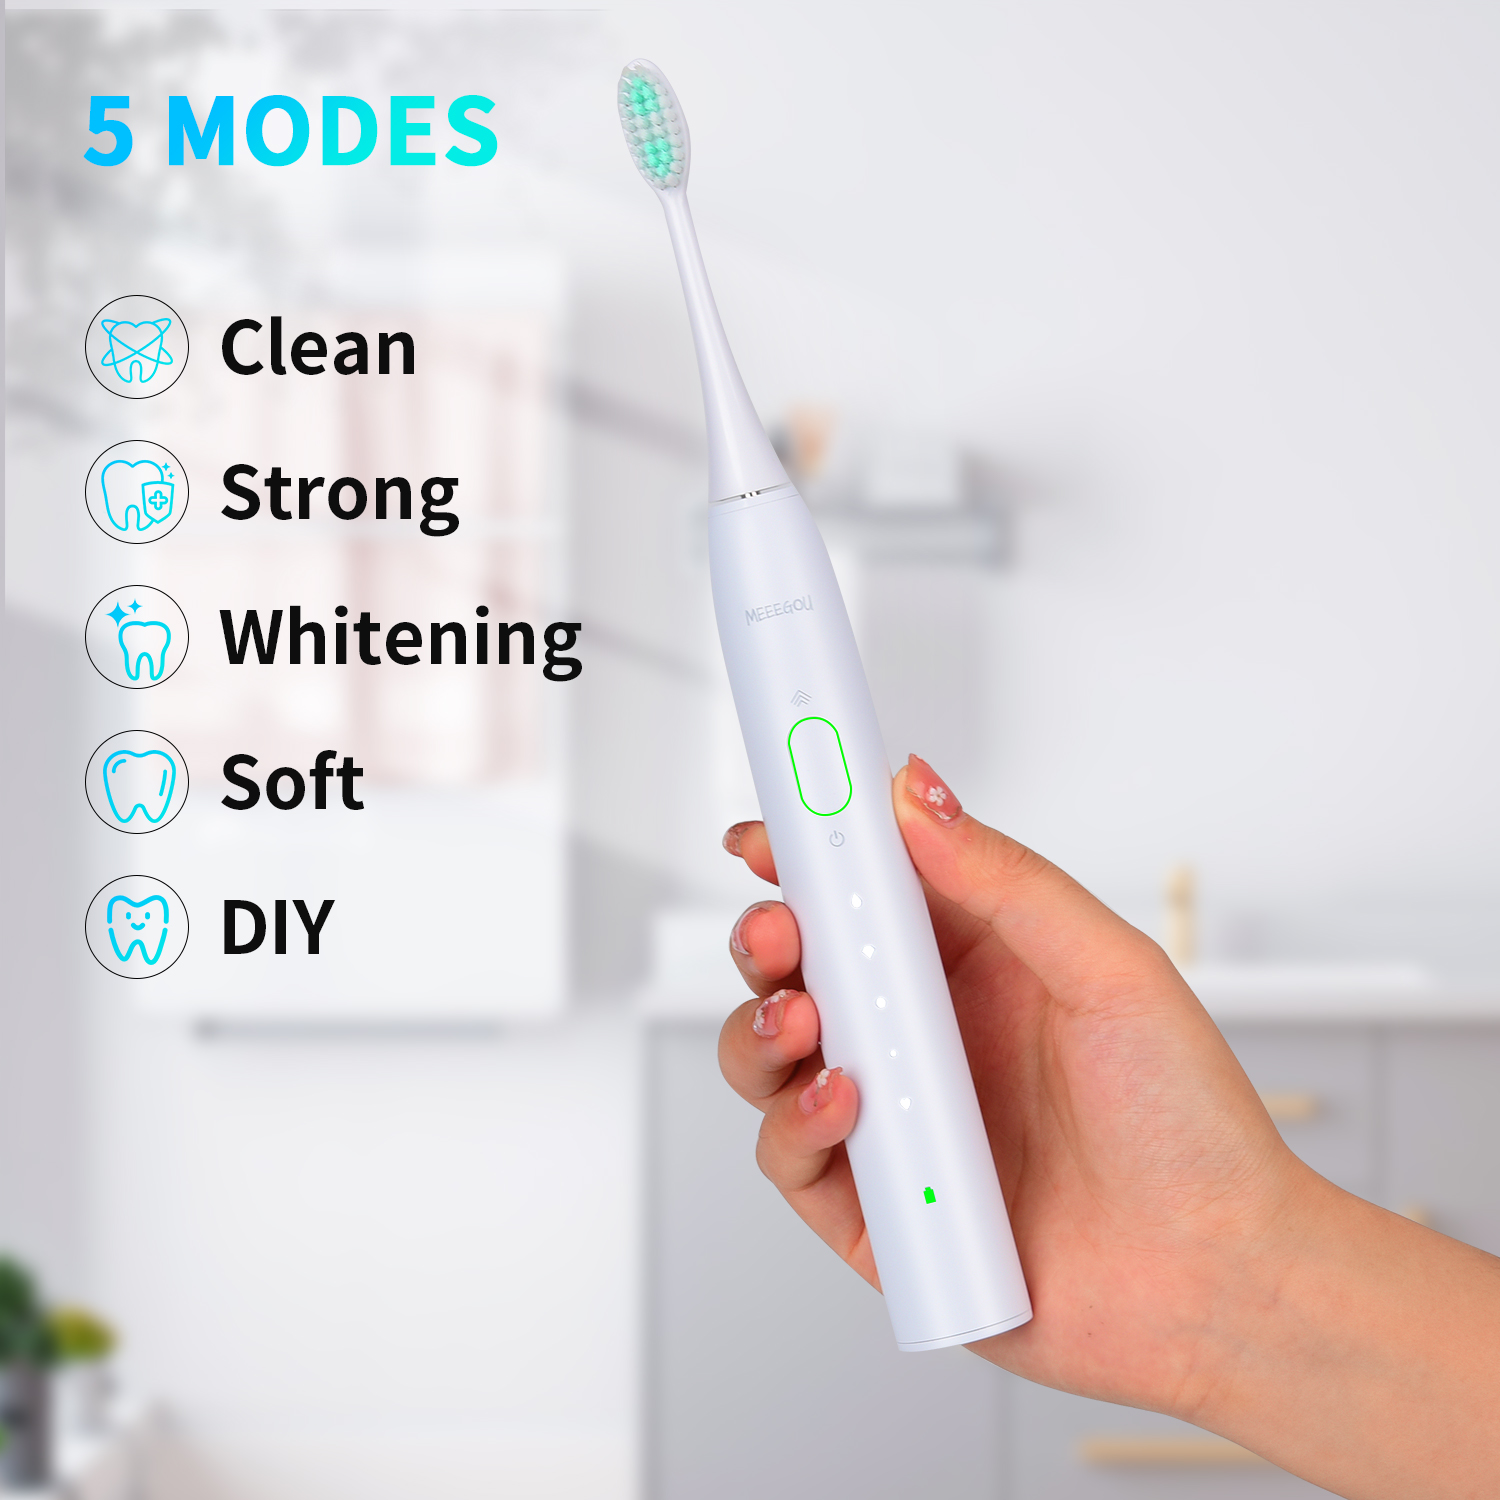 MEEEGOU Sonic Electric Toothbrush with Dupont Brush Heads, Dual Drive Motor, 5 Modes 3 Intensities, One Charge for 180 Days, IPX7 for Adults and Children- White